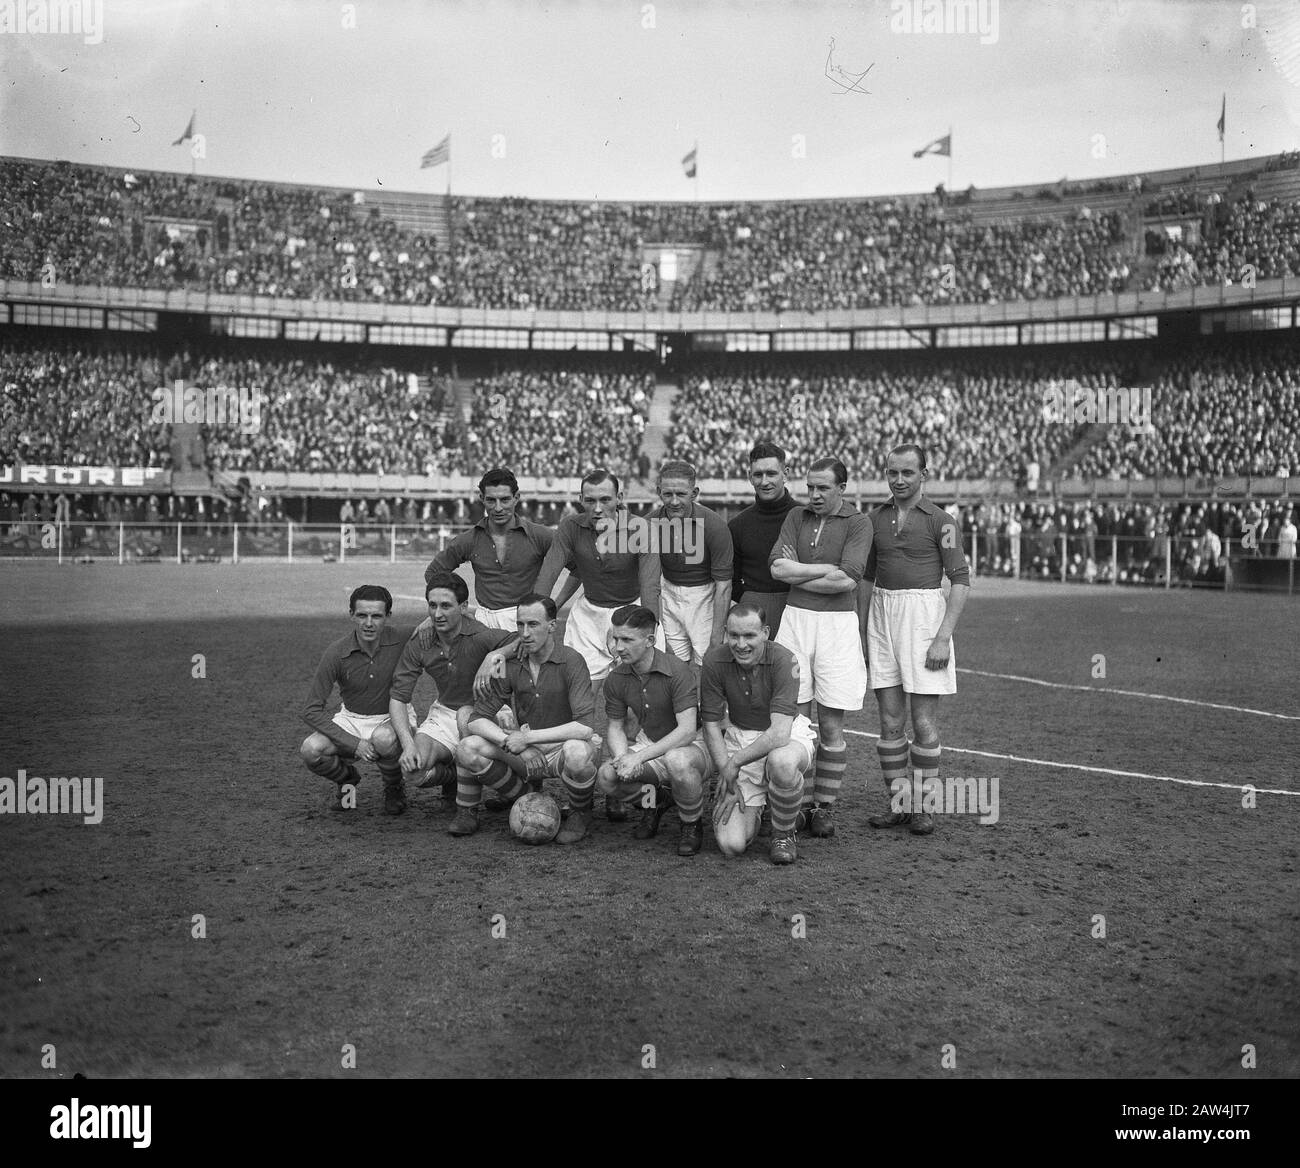 Dutch national team against Malmo Date: March 26, 1947 Location: Malmo Keywords: sport, football Institution Name: Dutch Team Stock Photo